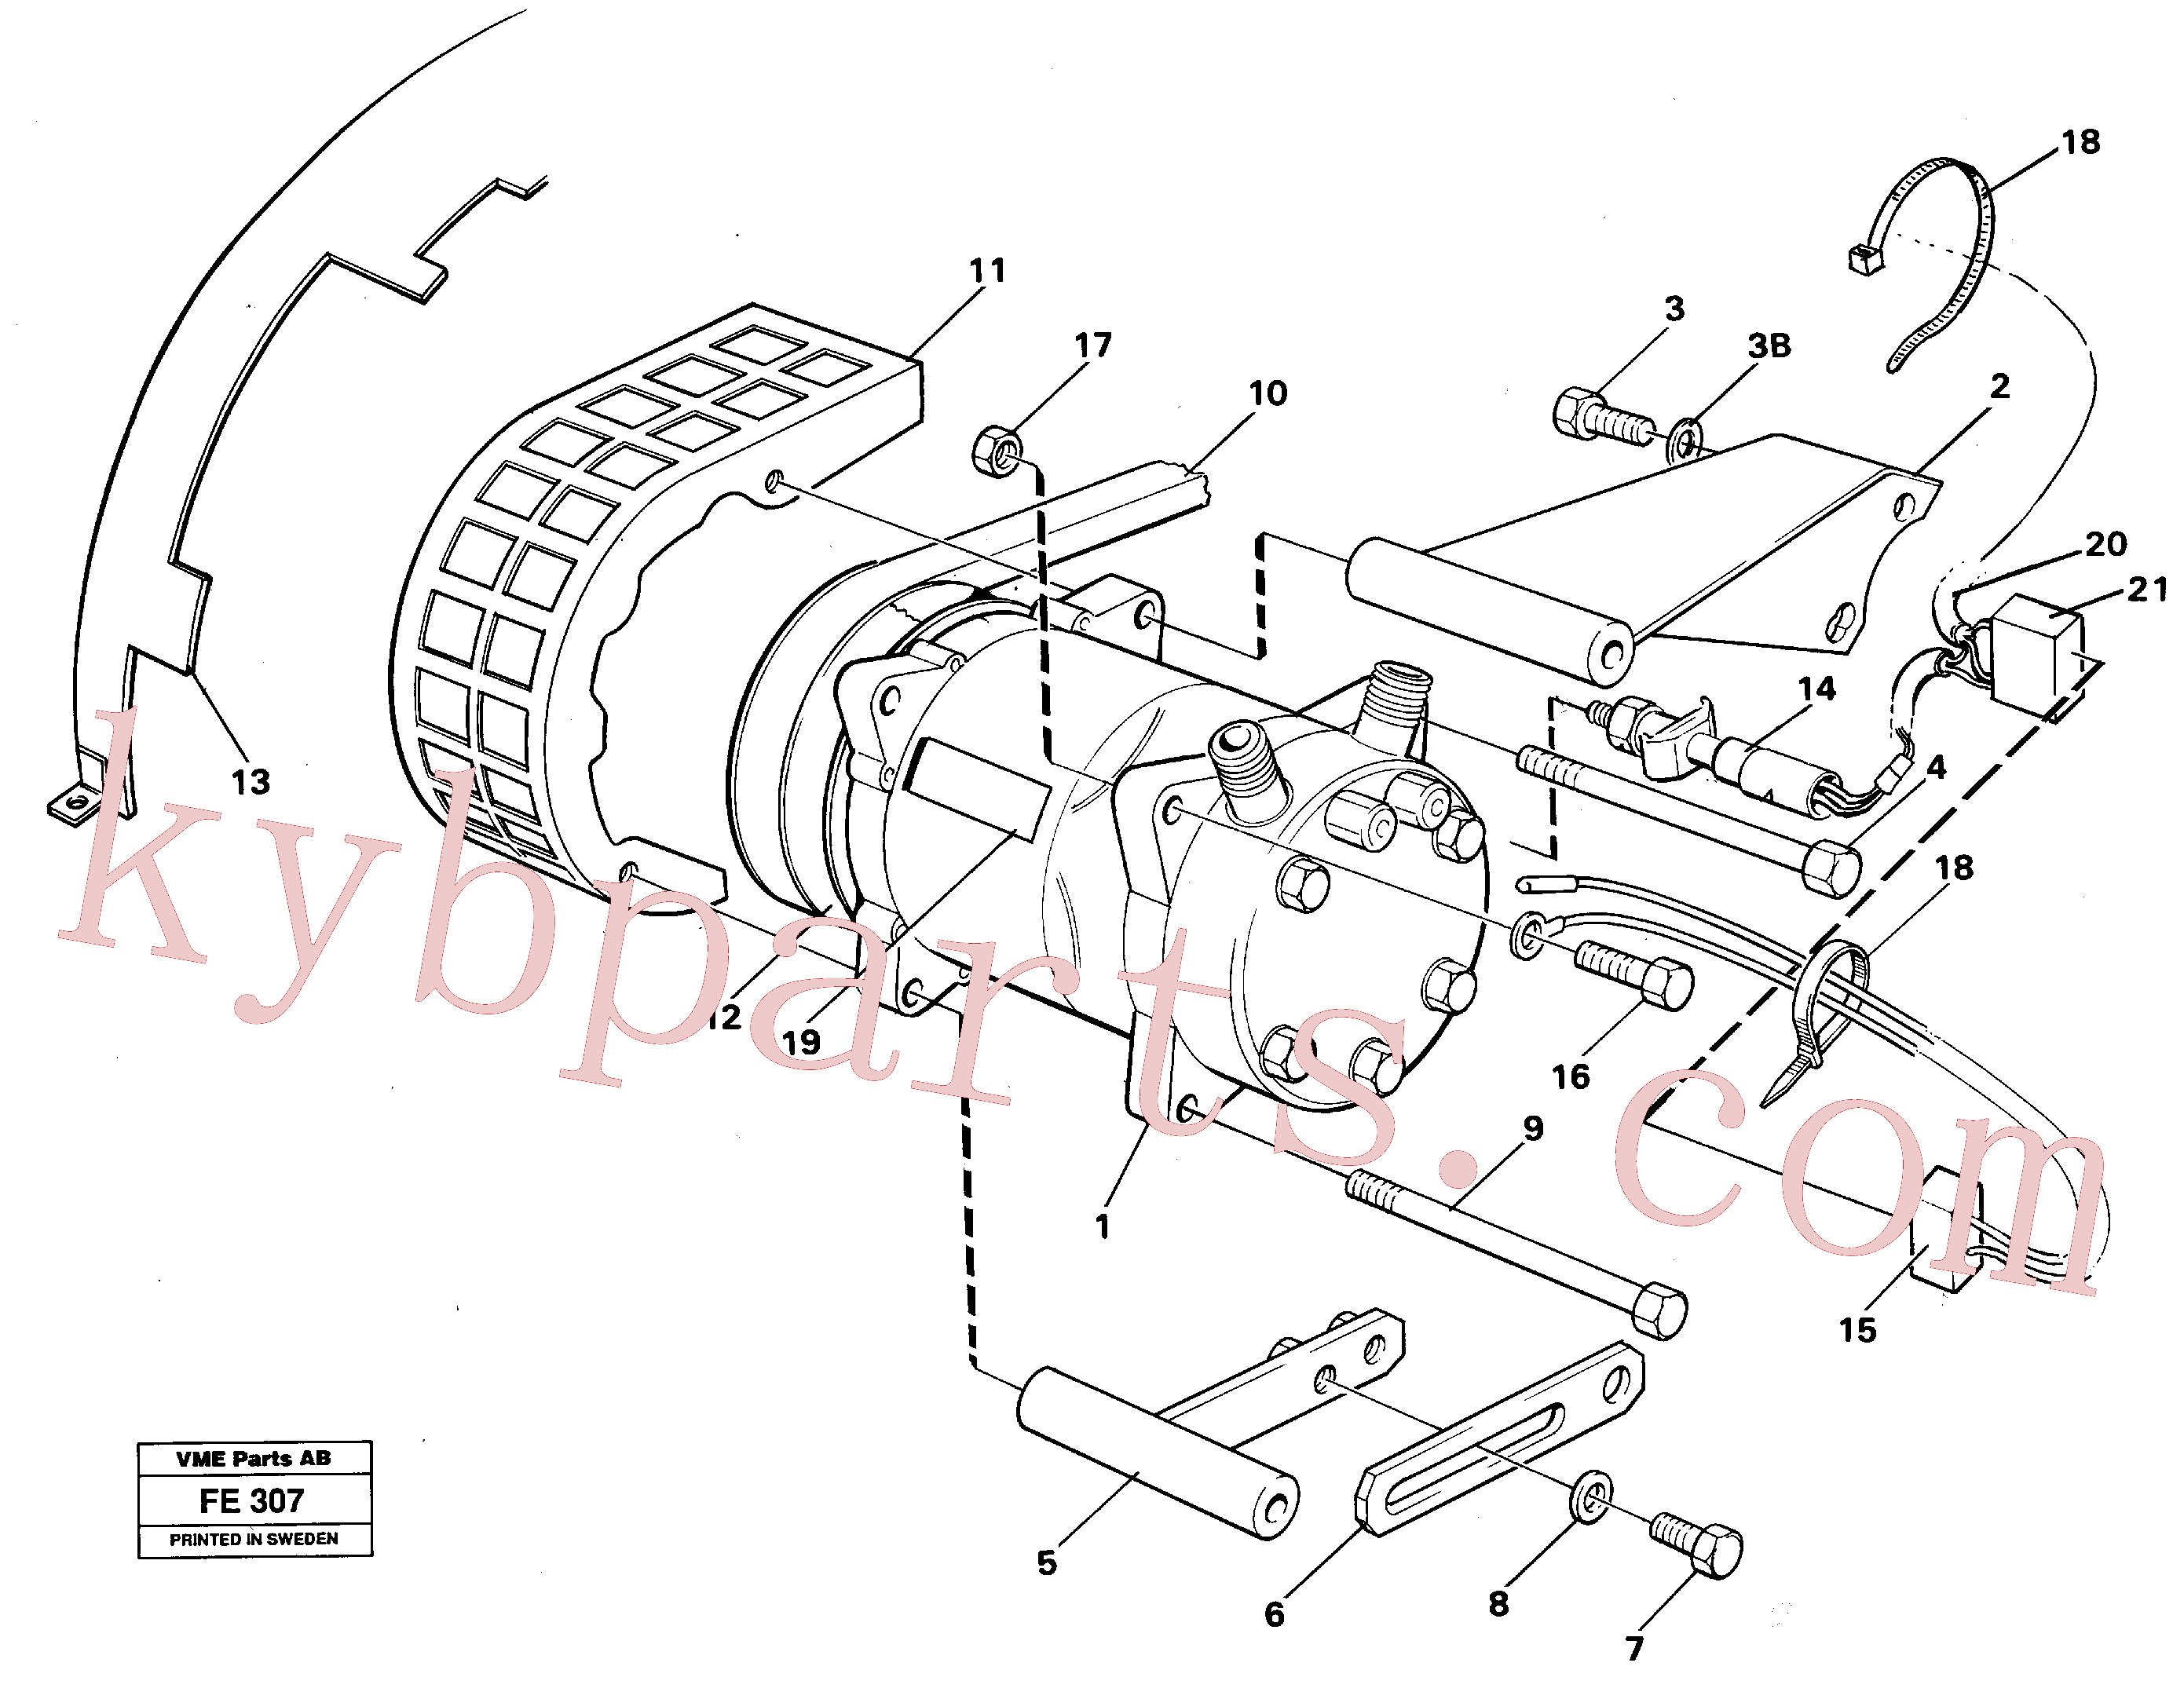 VOE14248863 for Volvo Air-compressor with fitting parts(FE307 assembly)